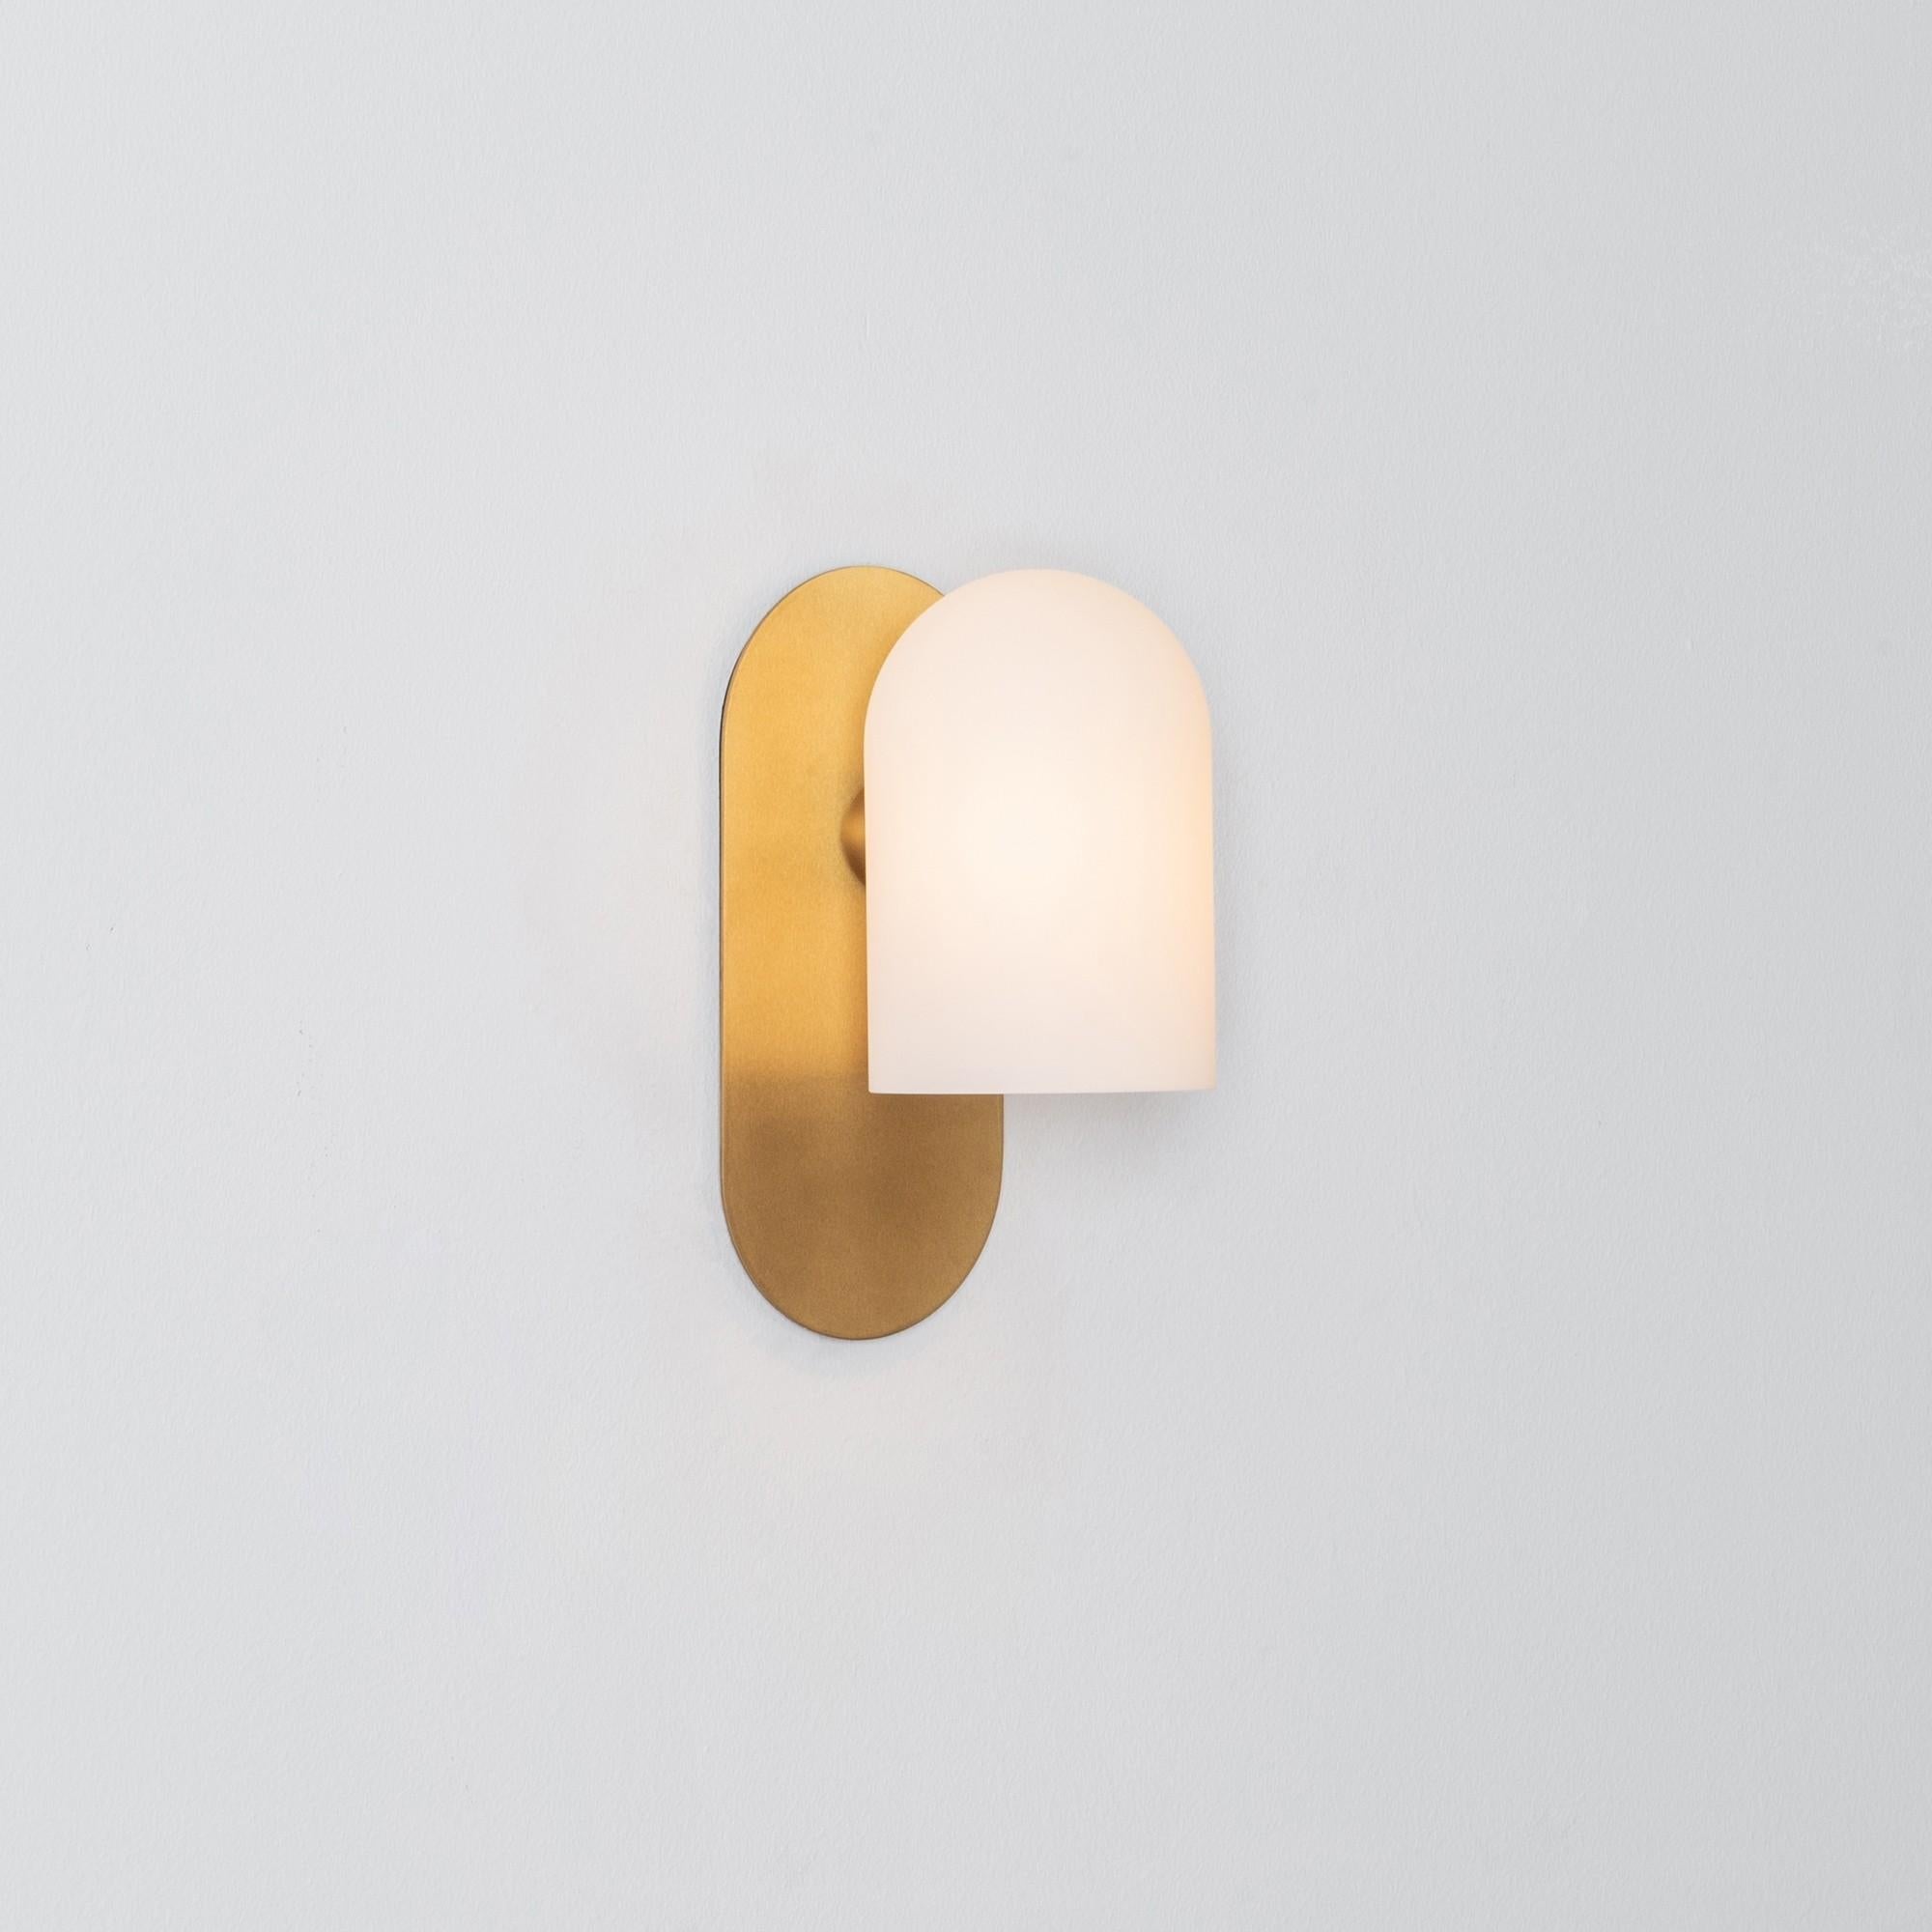 Brass small sconce by Schwung.
Dimensions: W 10.5 x D 14 x H 23 cm.
Materials: brass, frosted glass.

Finishes available: black gunmetal, polished nickel, brass.


Schwung is a German word, and loosely defined, means energy or momentumm of a